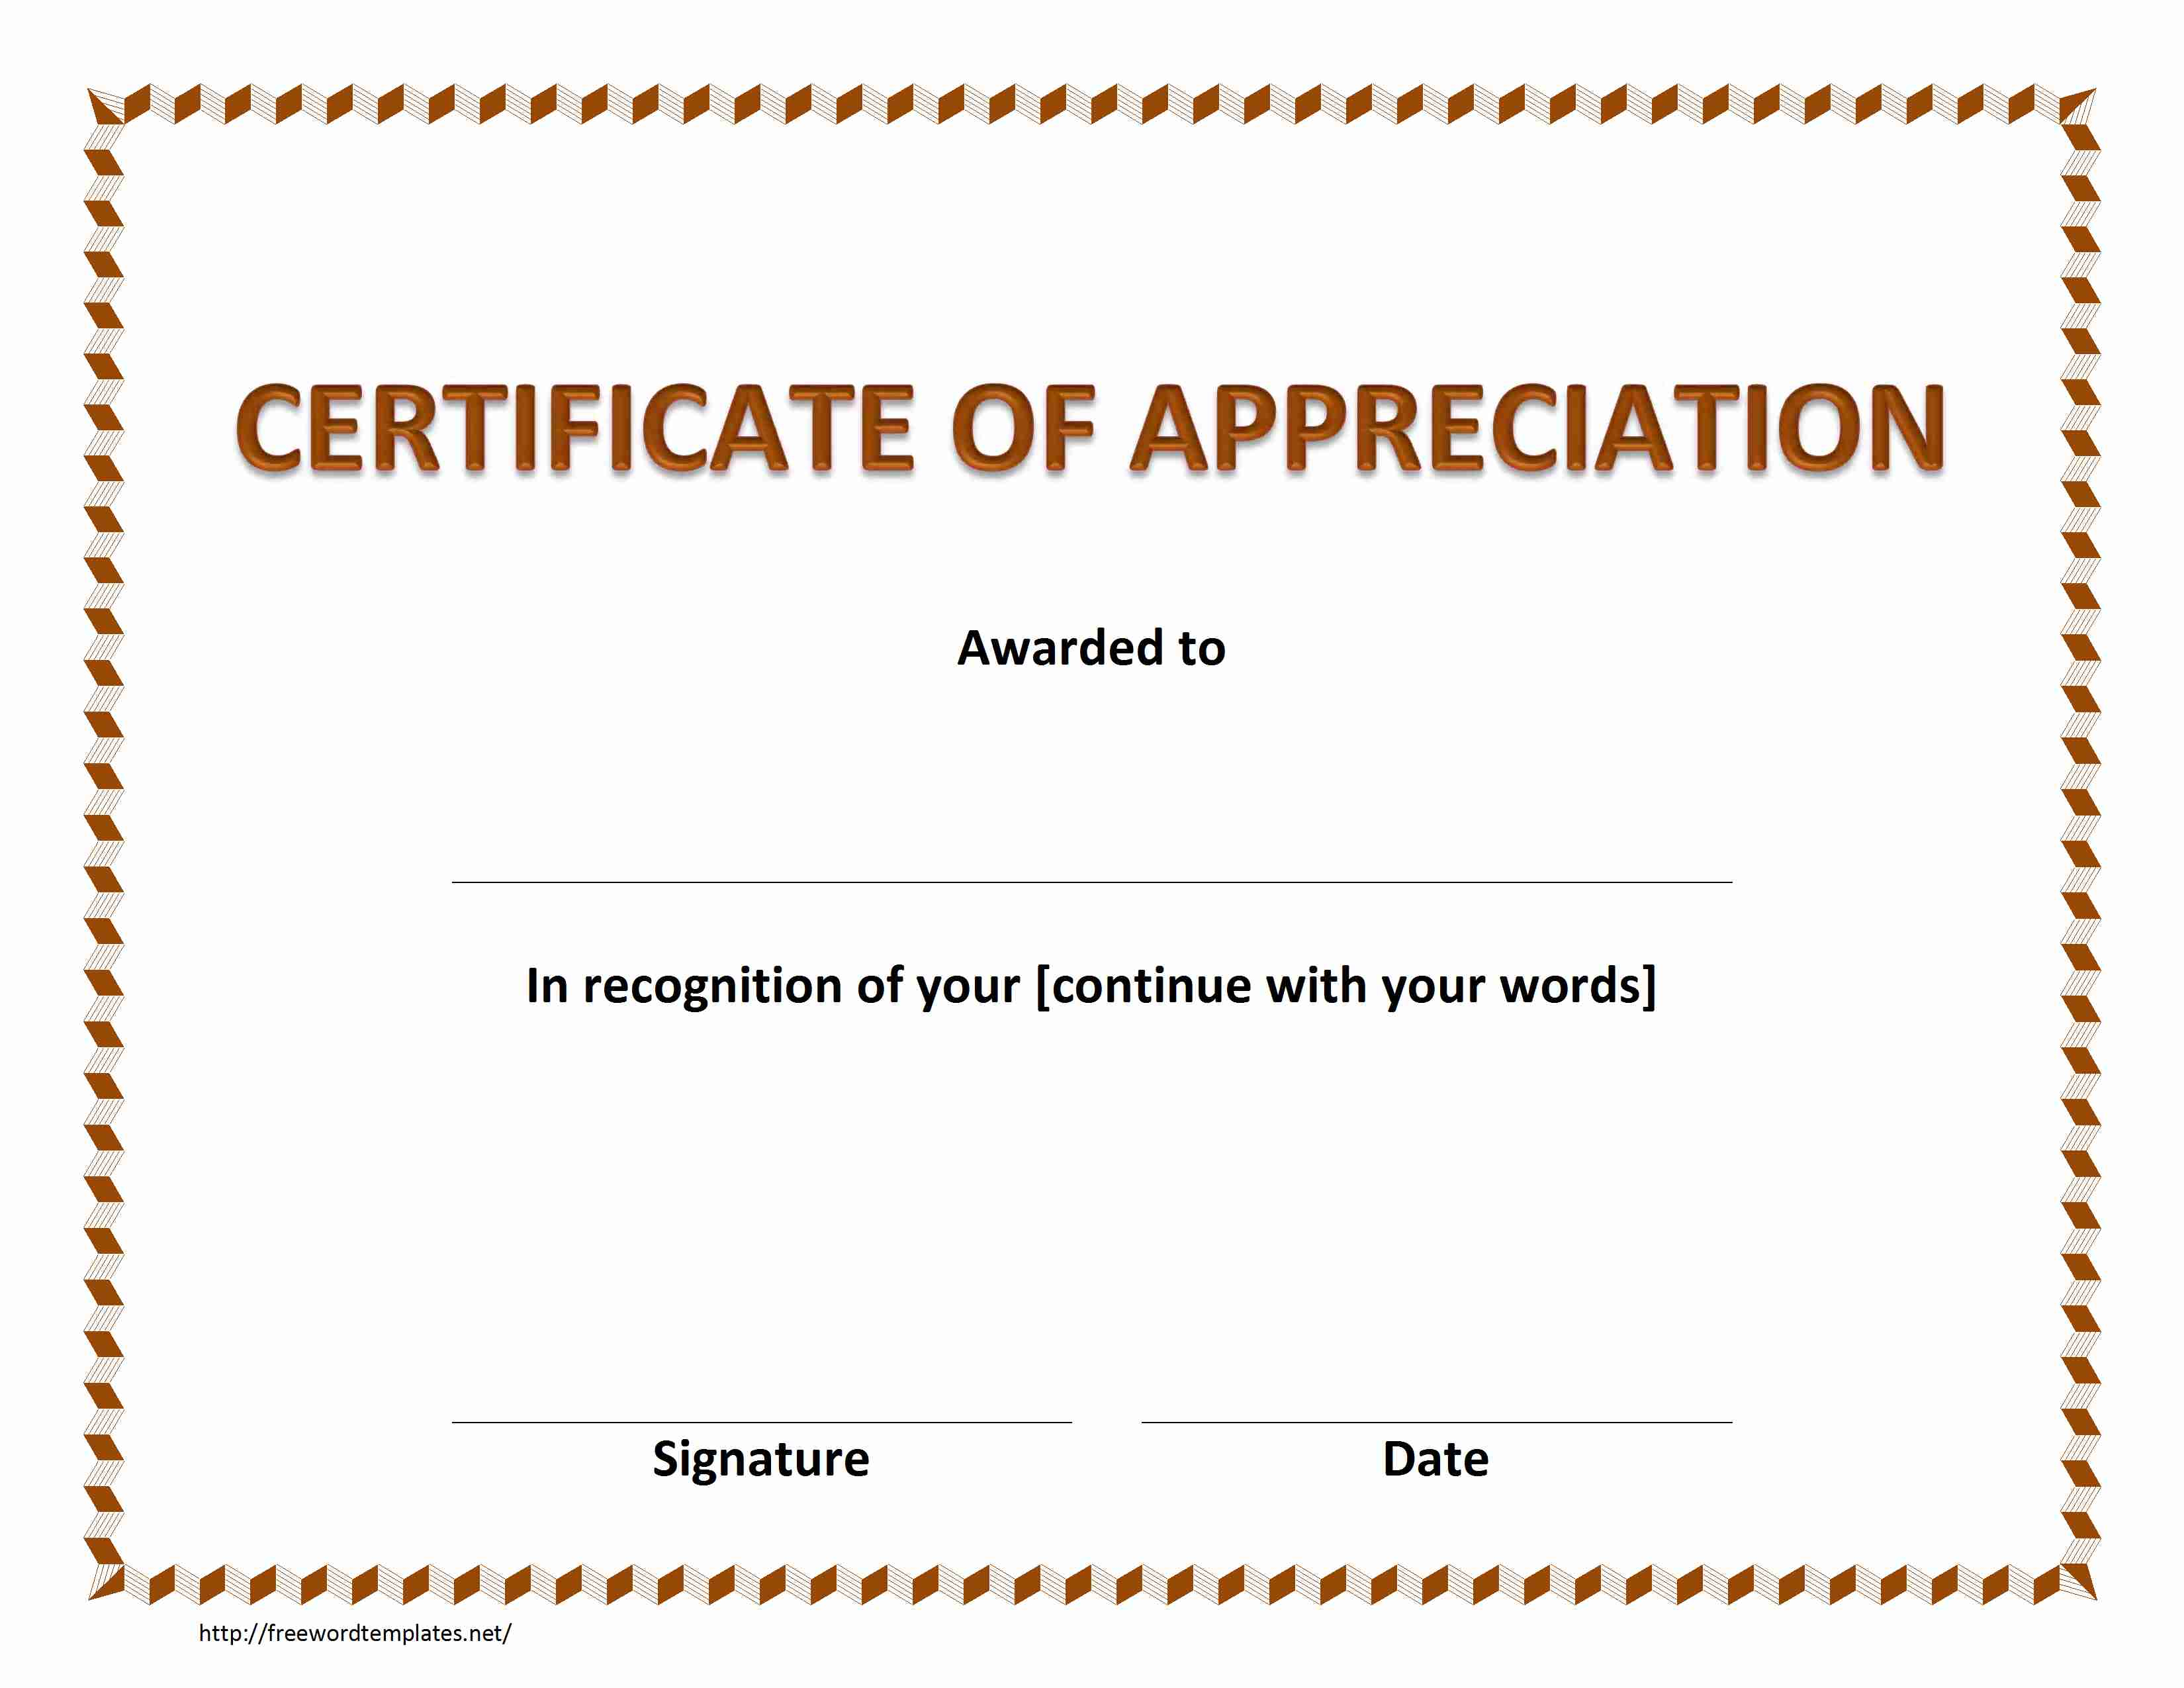 Certificate Of Appreciation - Free Printable Templates For Certificates Of Recognition